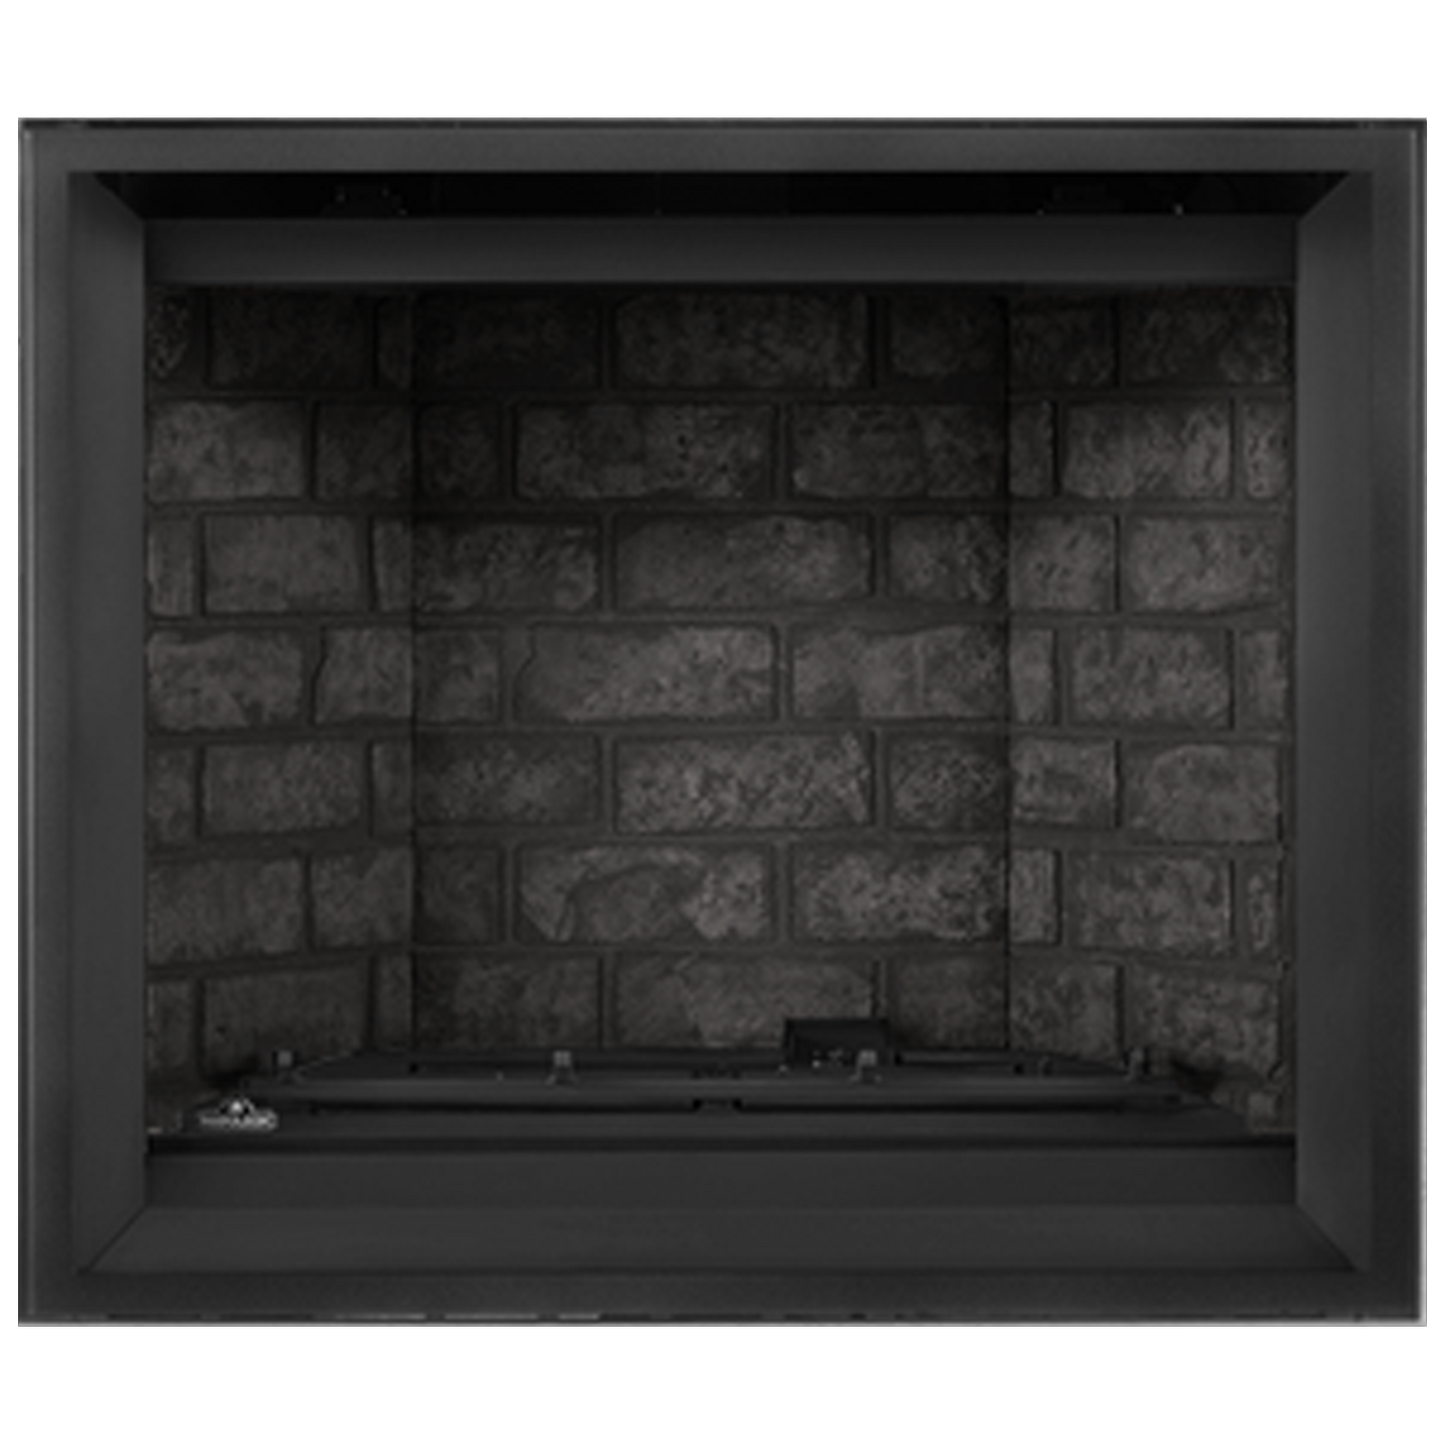 Napoleon Altitude X 42 Direct Vent Gas Fireplace | AX42 |